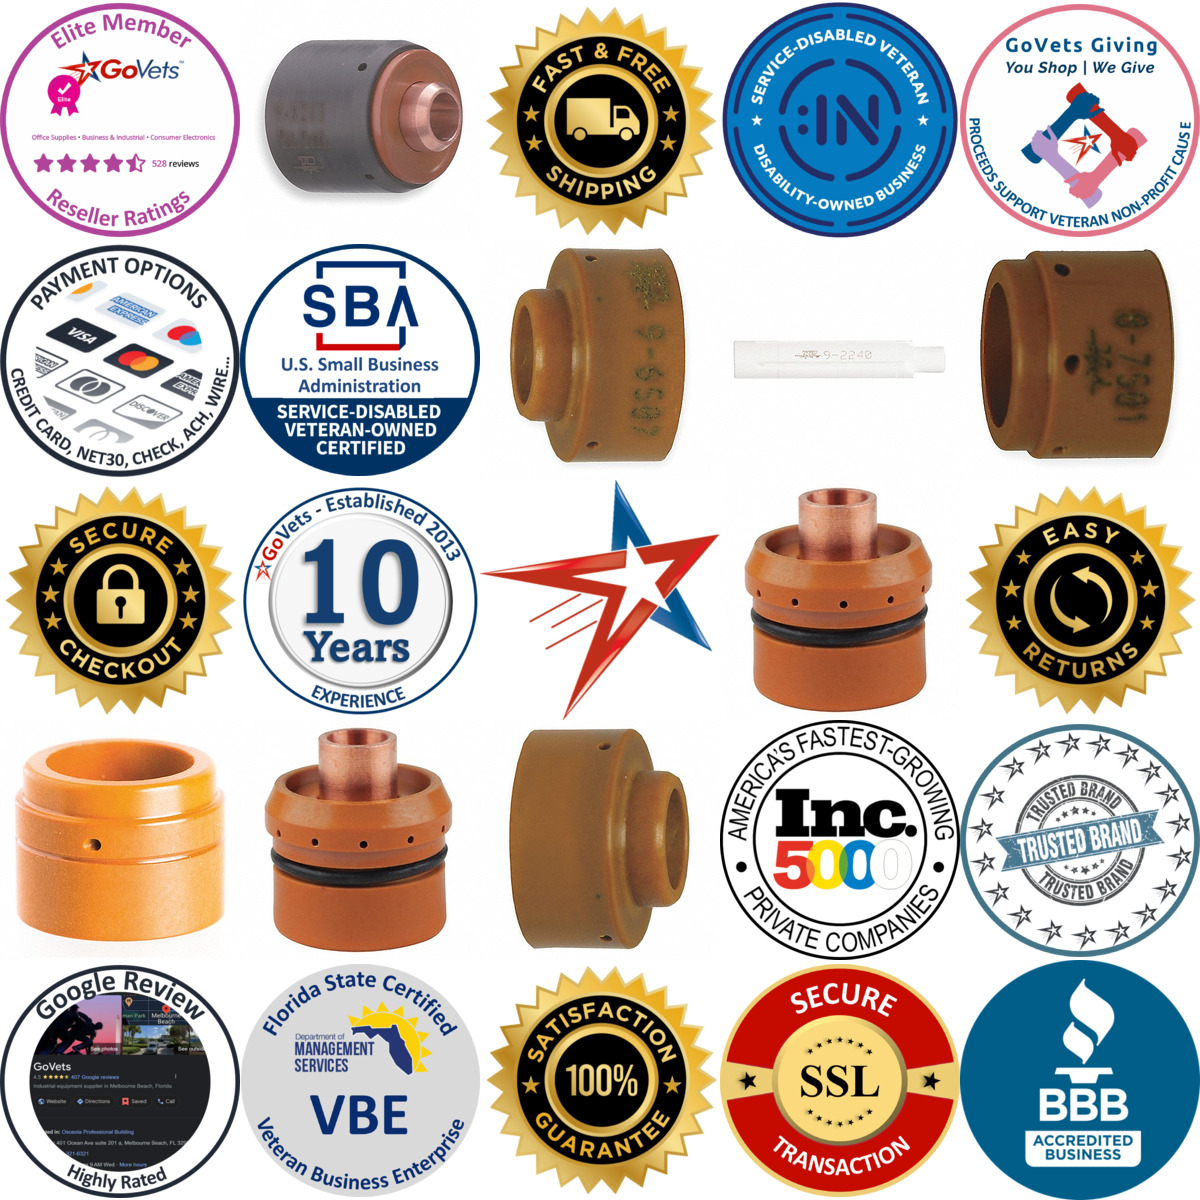 A selection of Plasma Cutting Start Cartridges products on GoVets